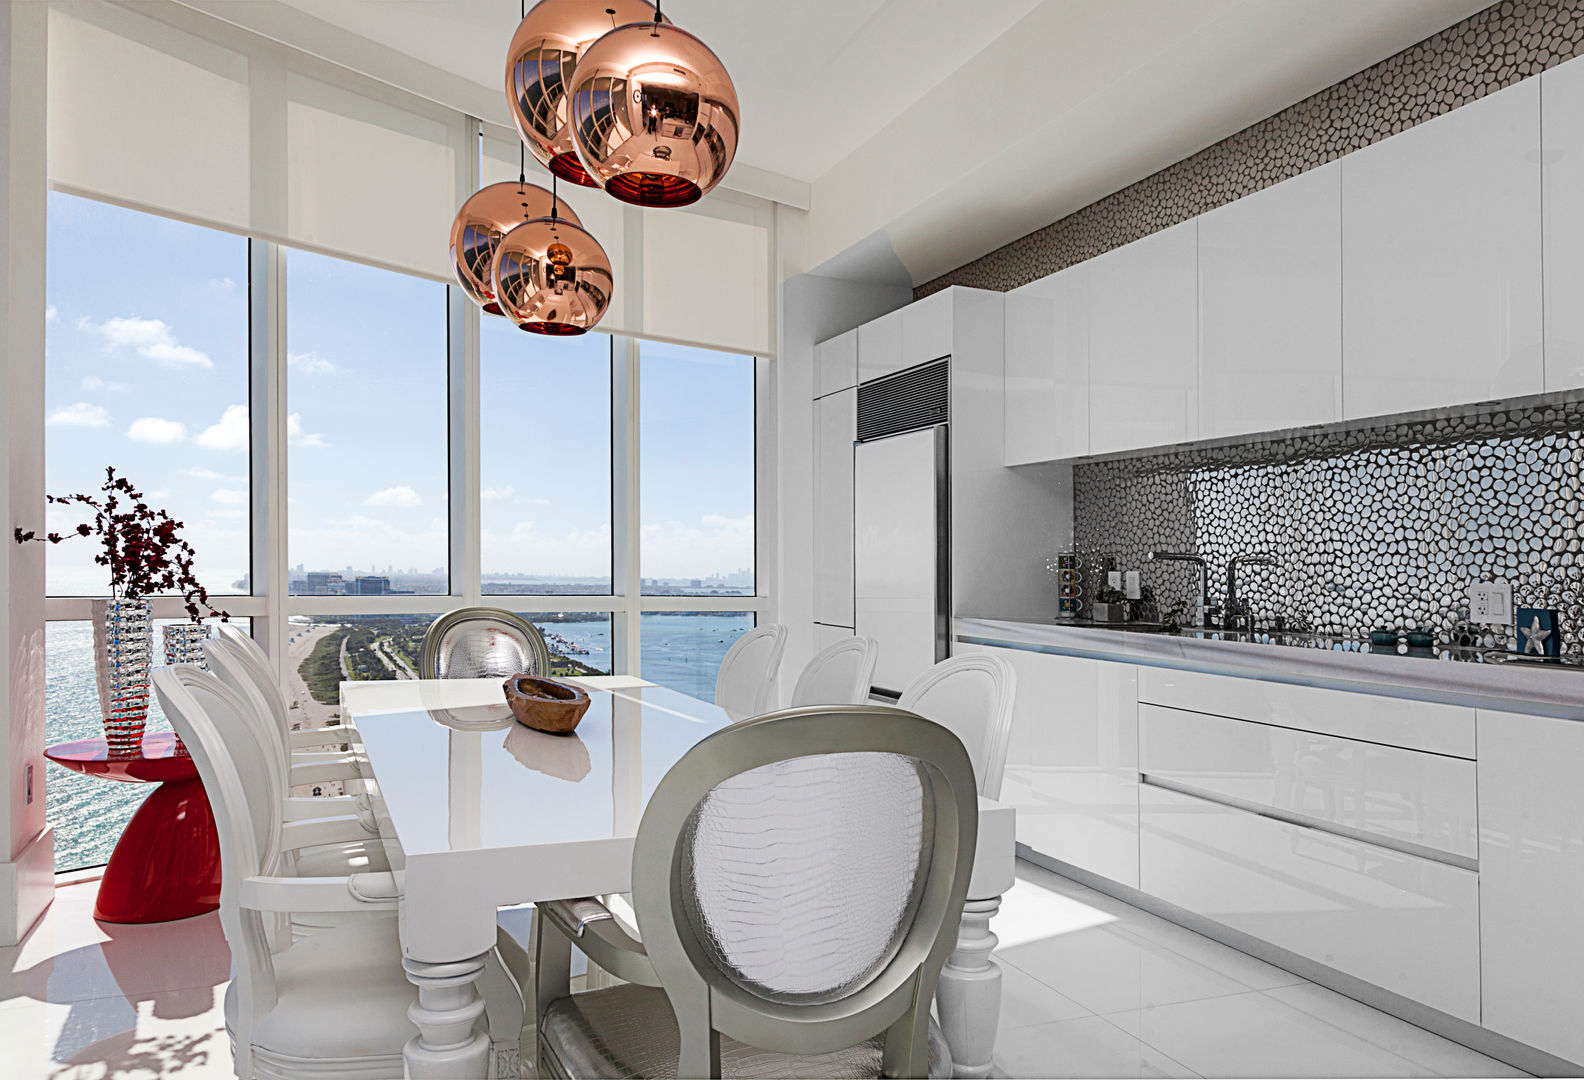 Sunny Isles - Florida - US, Infinity Spaces Infinity Spaces Dapur Modern